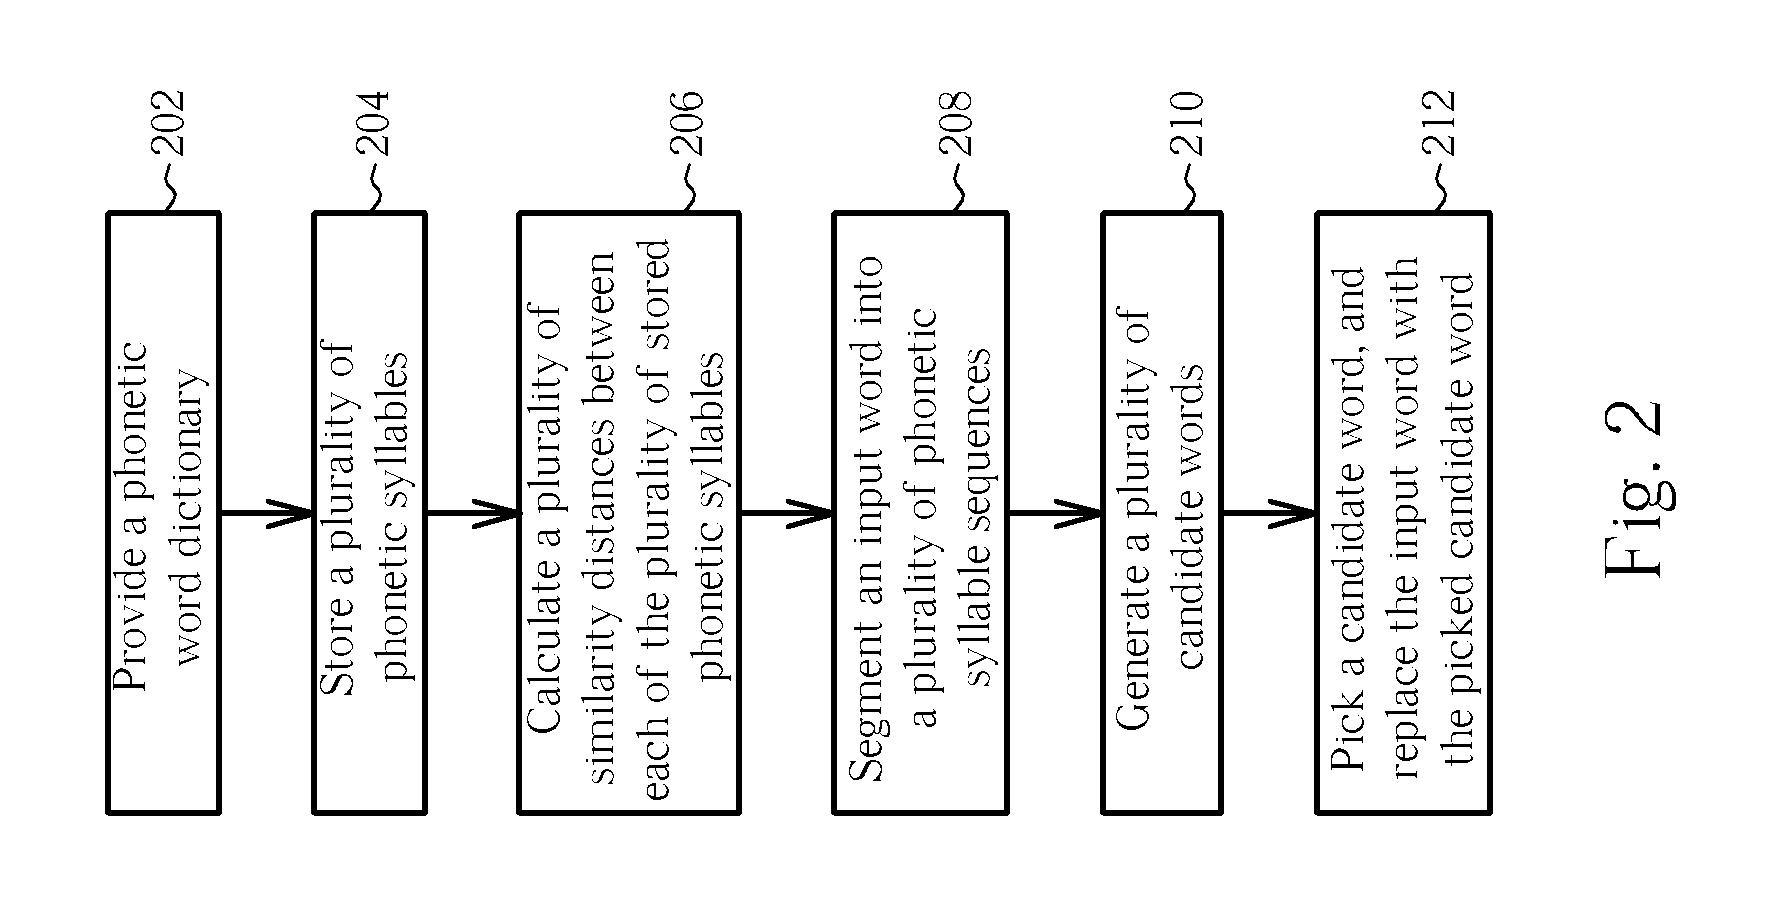 Typing candidate generating method for enhancing typing efficiency